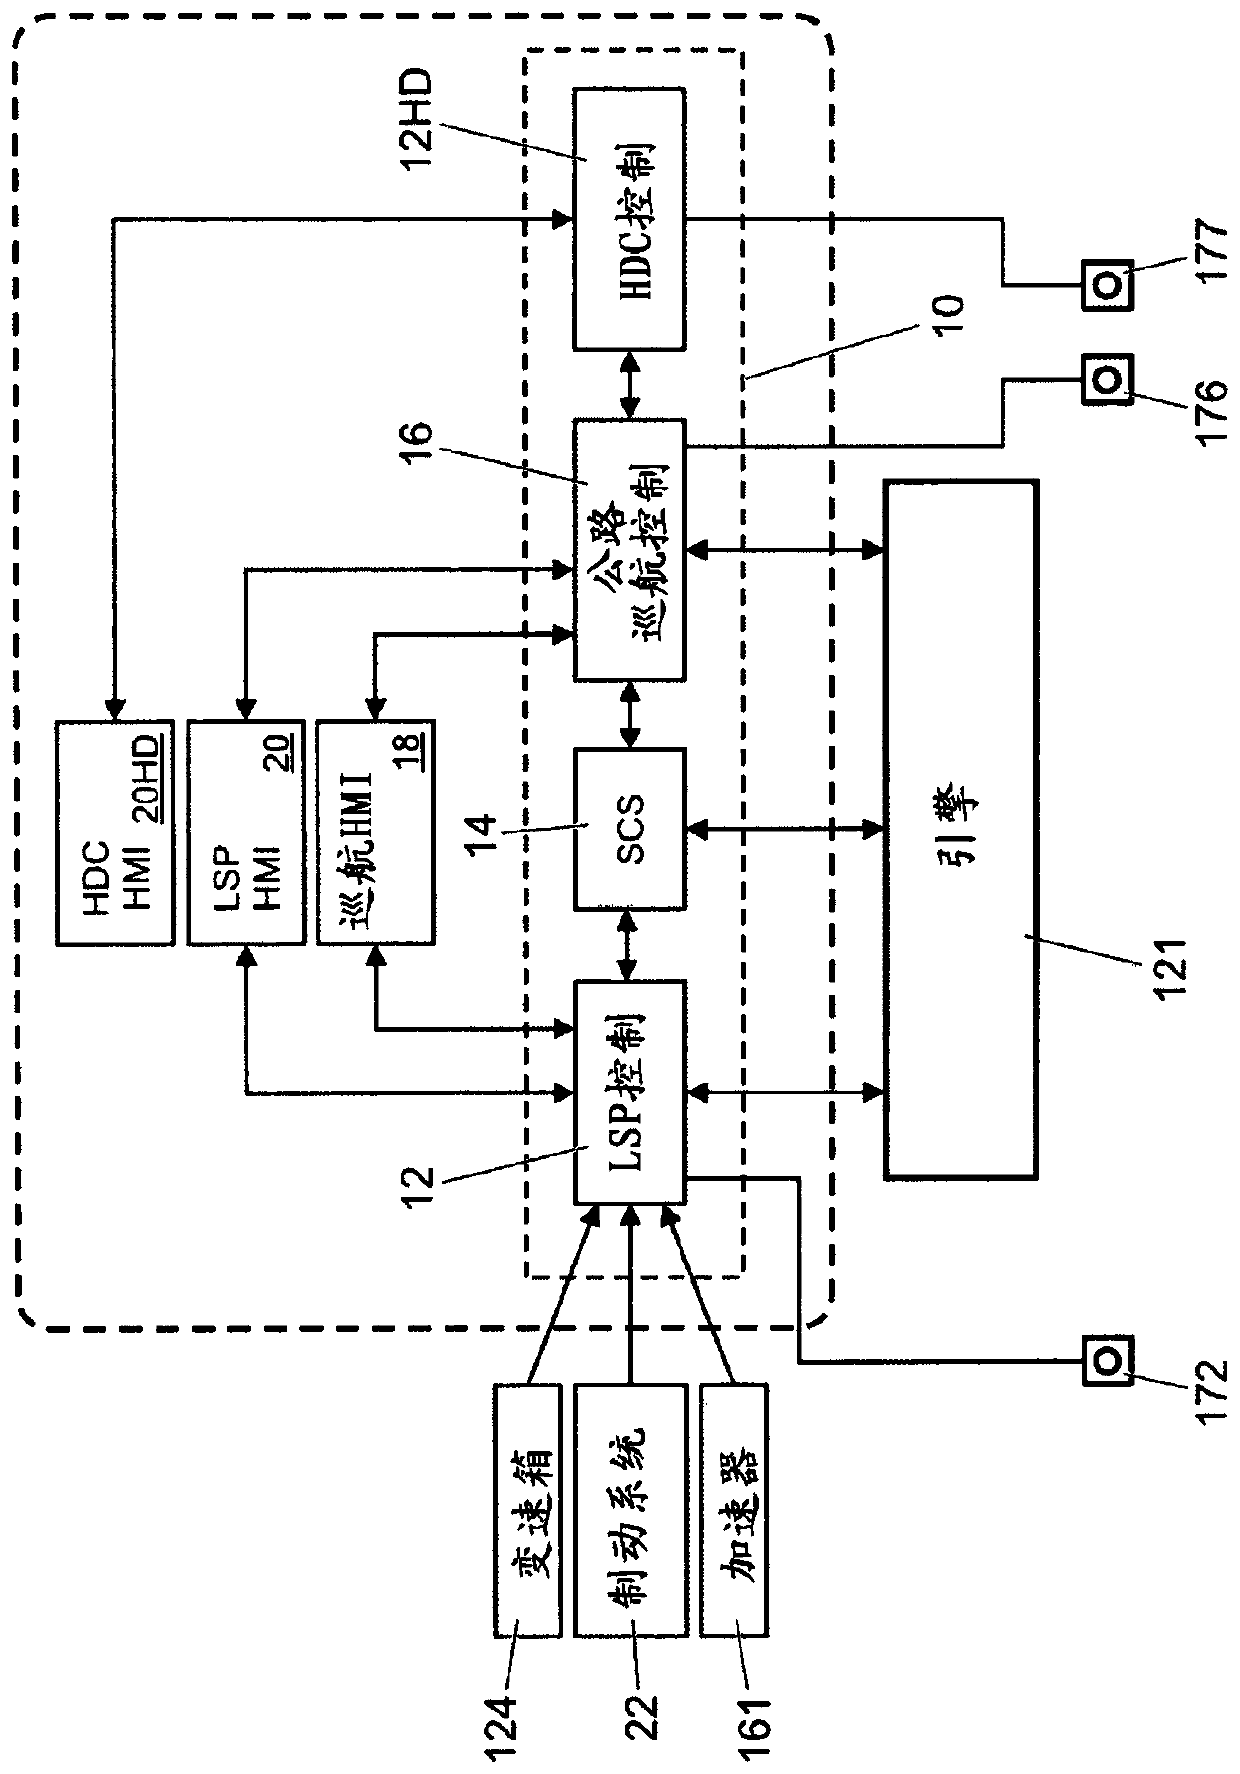 Vehicle speed control system and method of operating same